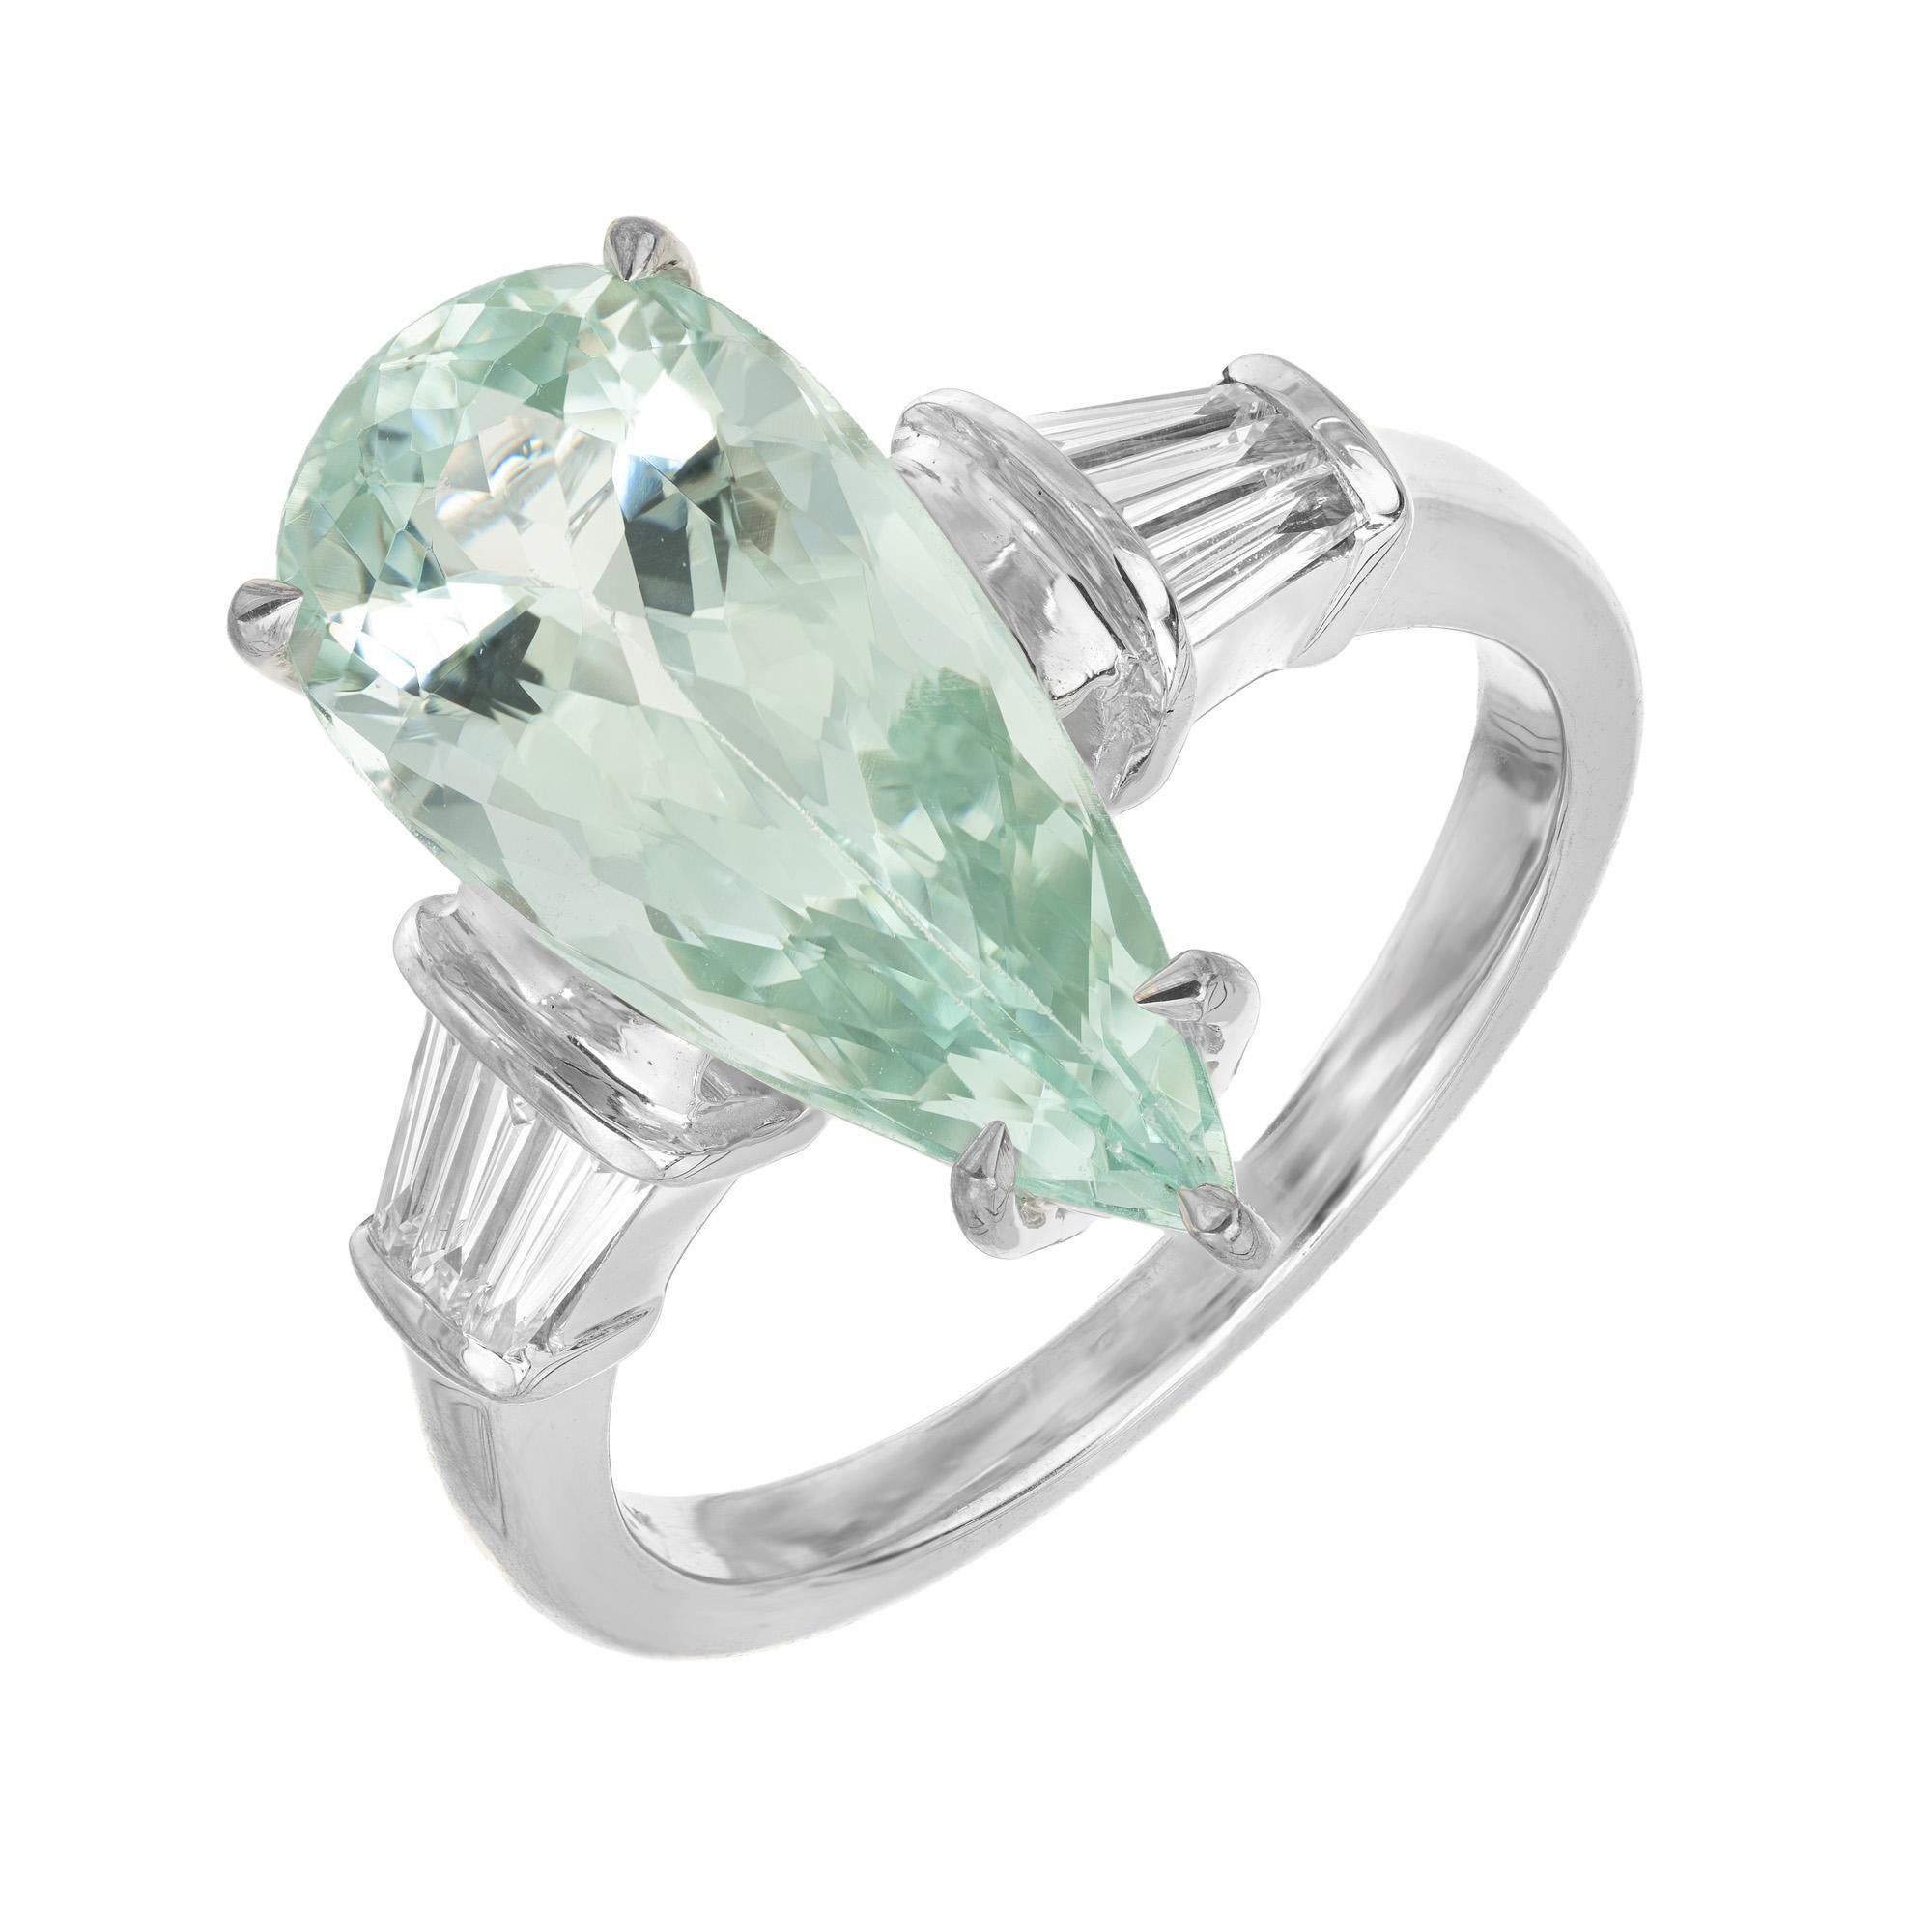 Wonderful 1960's elongated natural aqua and diamond ring. One pear shaped 4.63ct aquamarine mounted in a 14k white gold setting, accented with three baguette diamonds on each side. The aqua has highlighted with beautiful green and blue hues. 

1